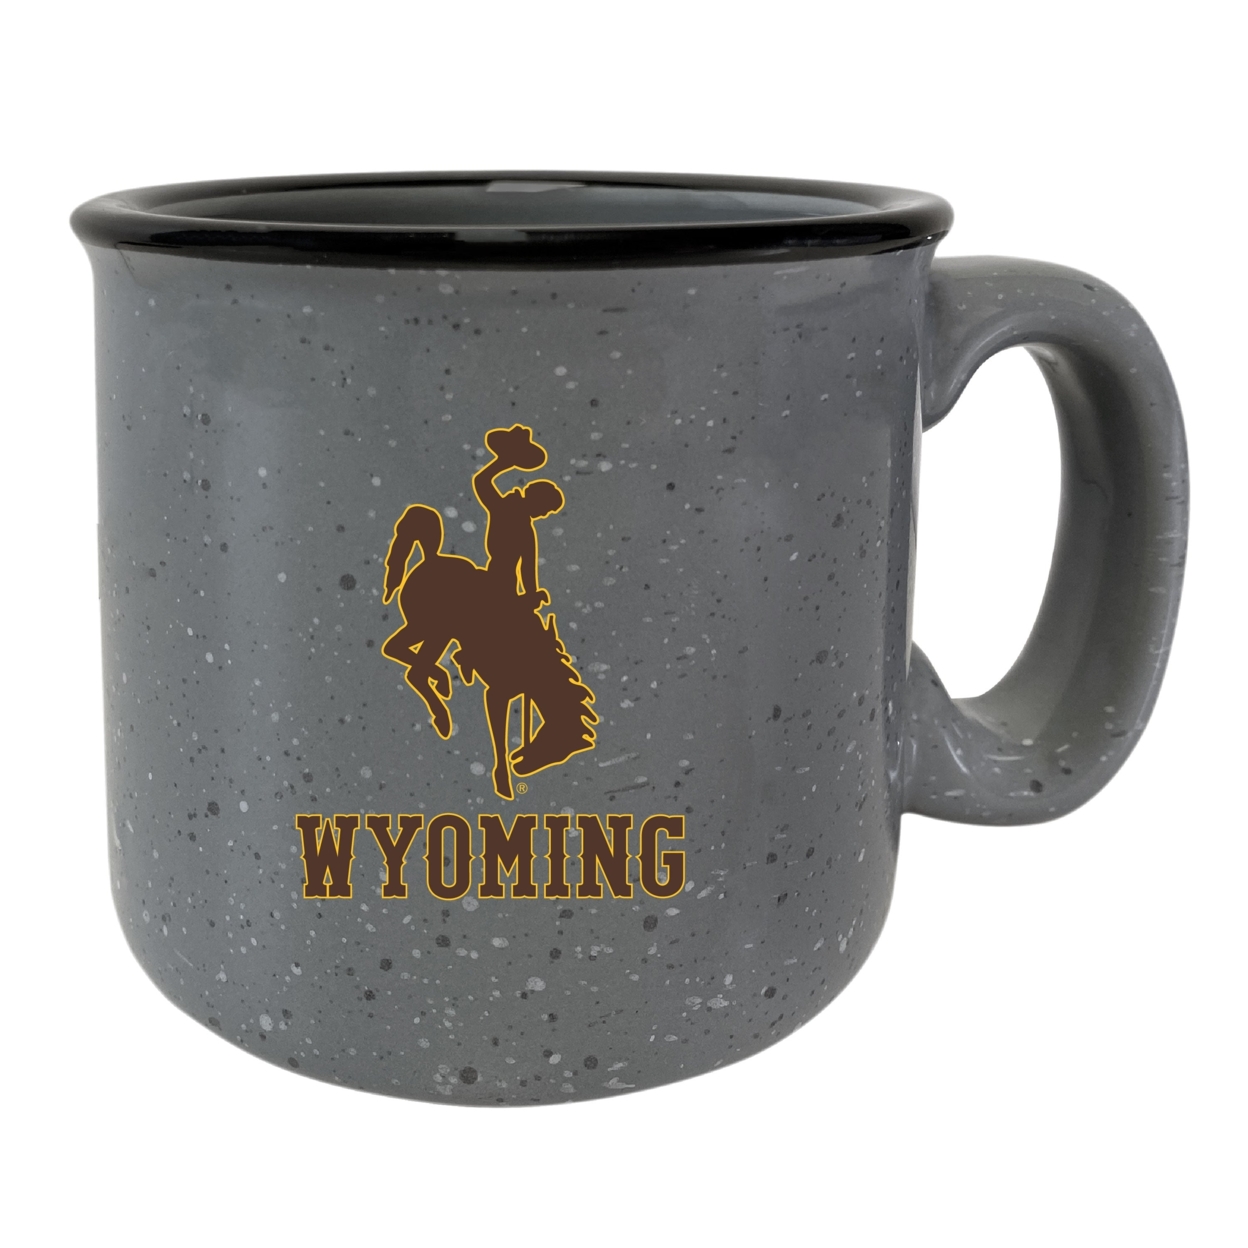 University Of Wyoming Speckled Ceramic Camper Coffee Mug - Choose Your Color - Gray